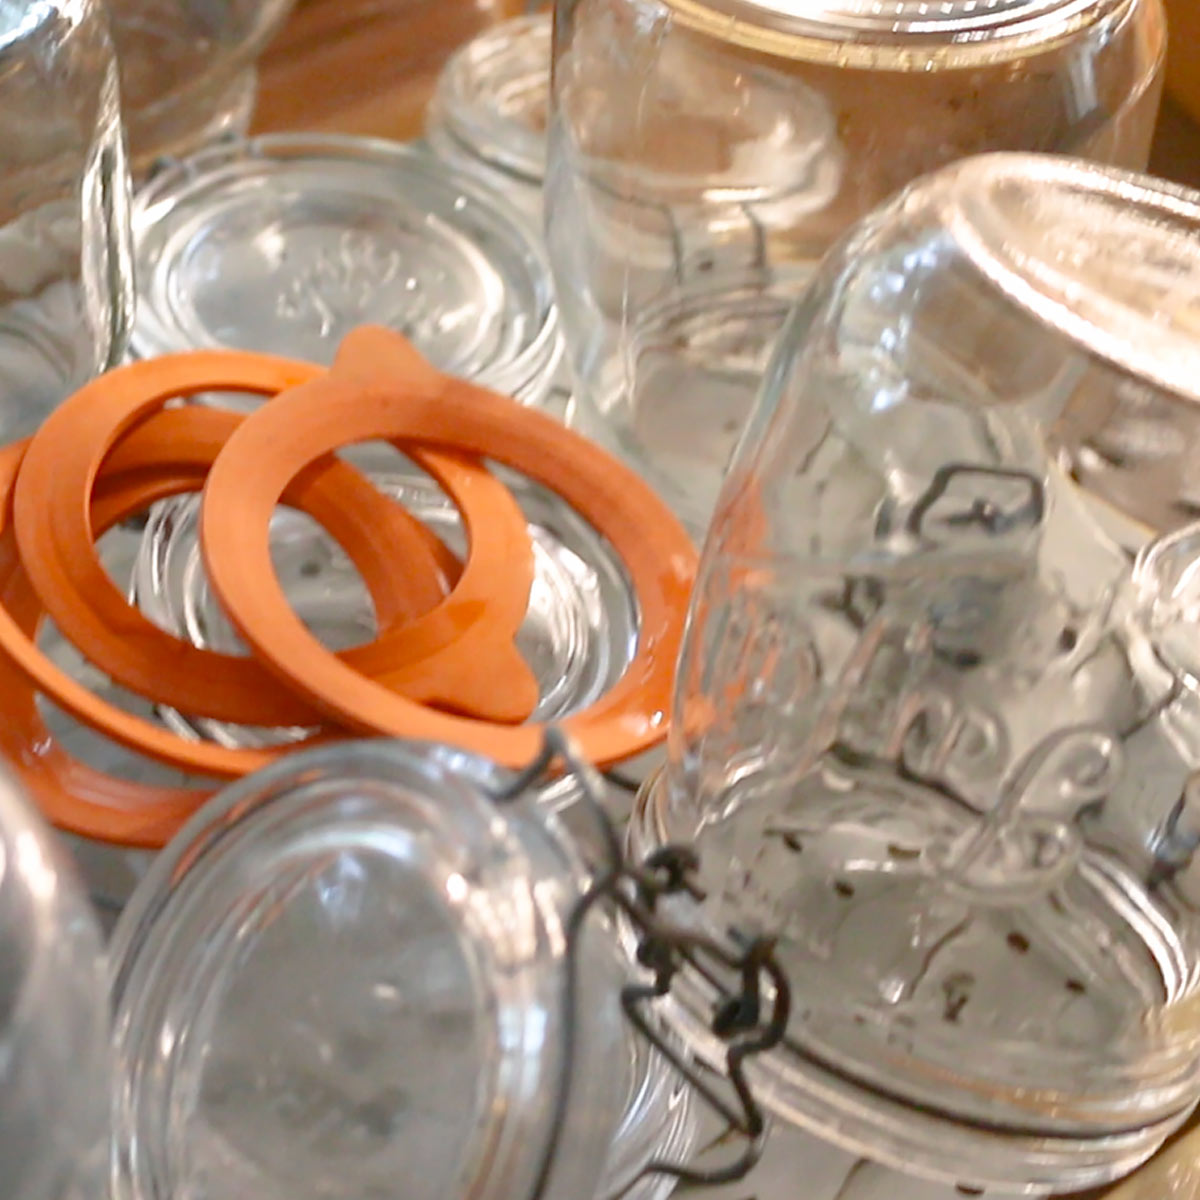 wash canning jars and rubber gaskets with soapy water.